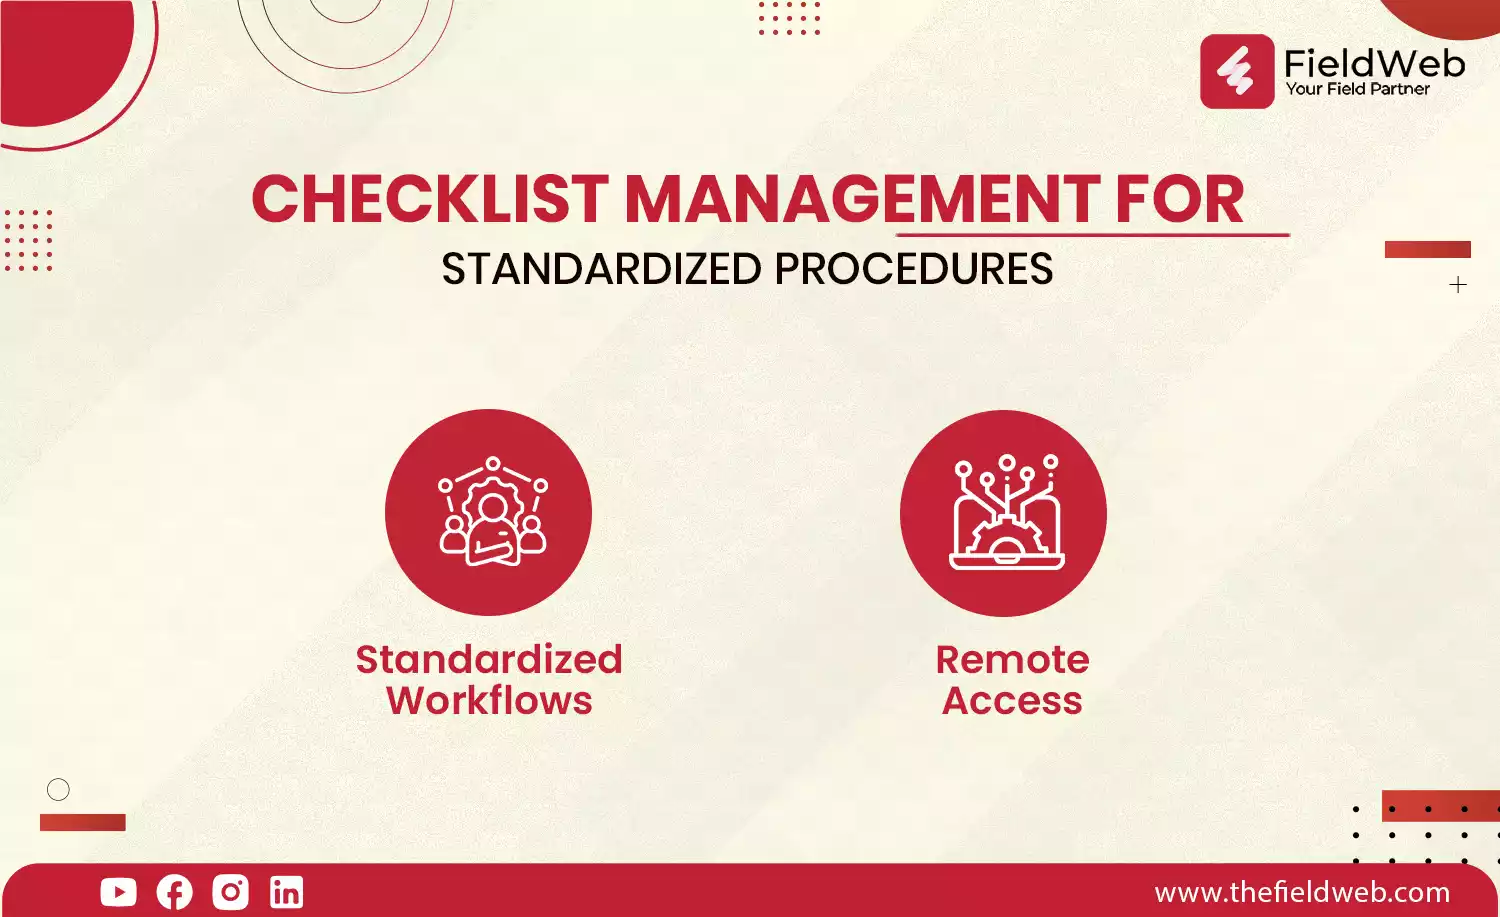 image is displaying Checklist Management for Standardized Procedures